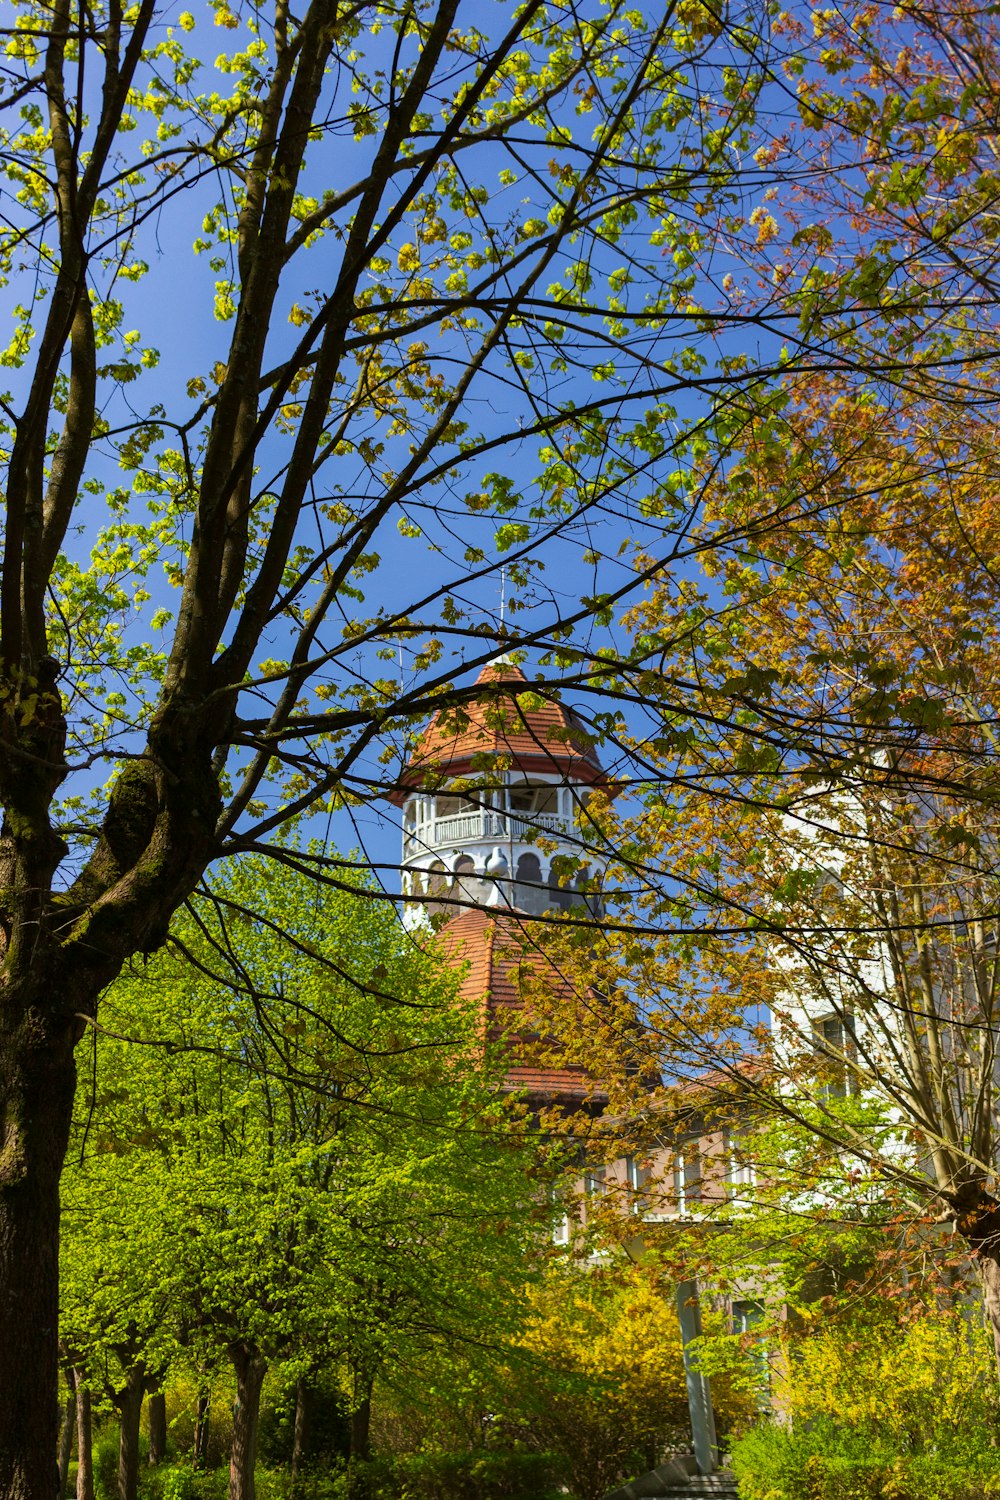 a clock tower towering over a lush green park